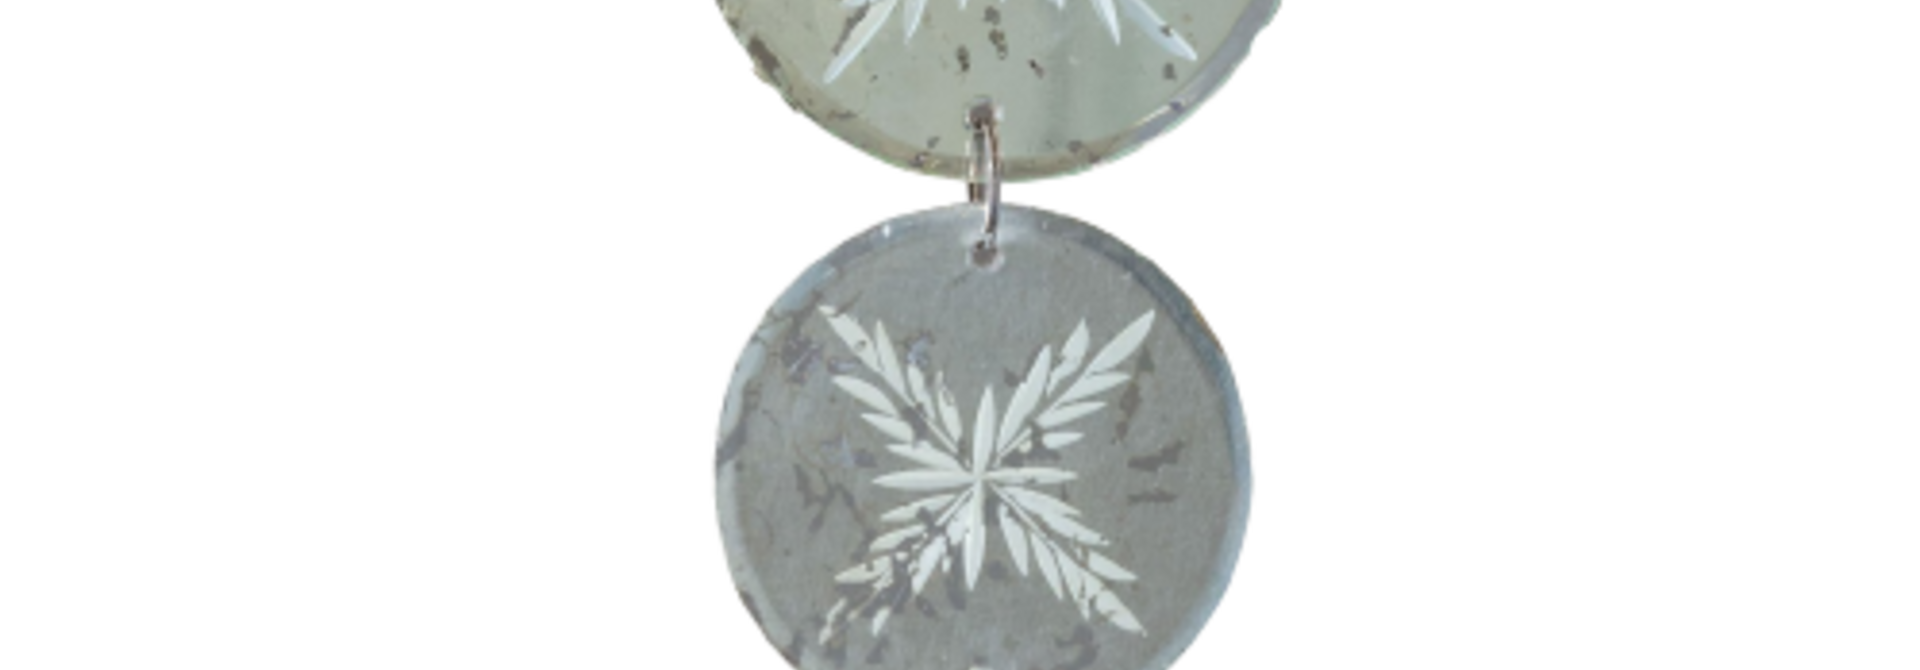 Antiqued Round Triple Snowflake | The Holiday Ornament Collection - 3.5 Inch x 8.75 Inch x .25 Inch